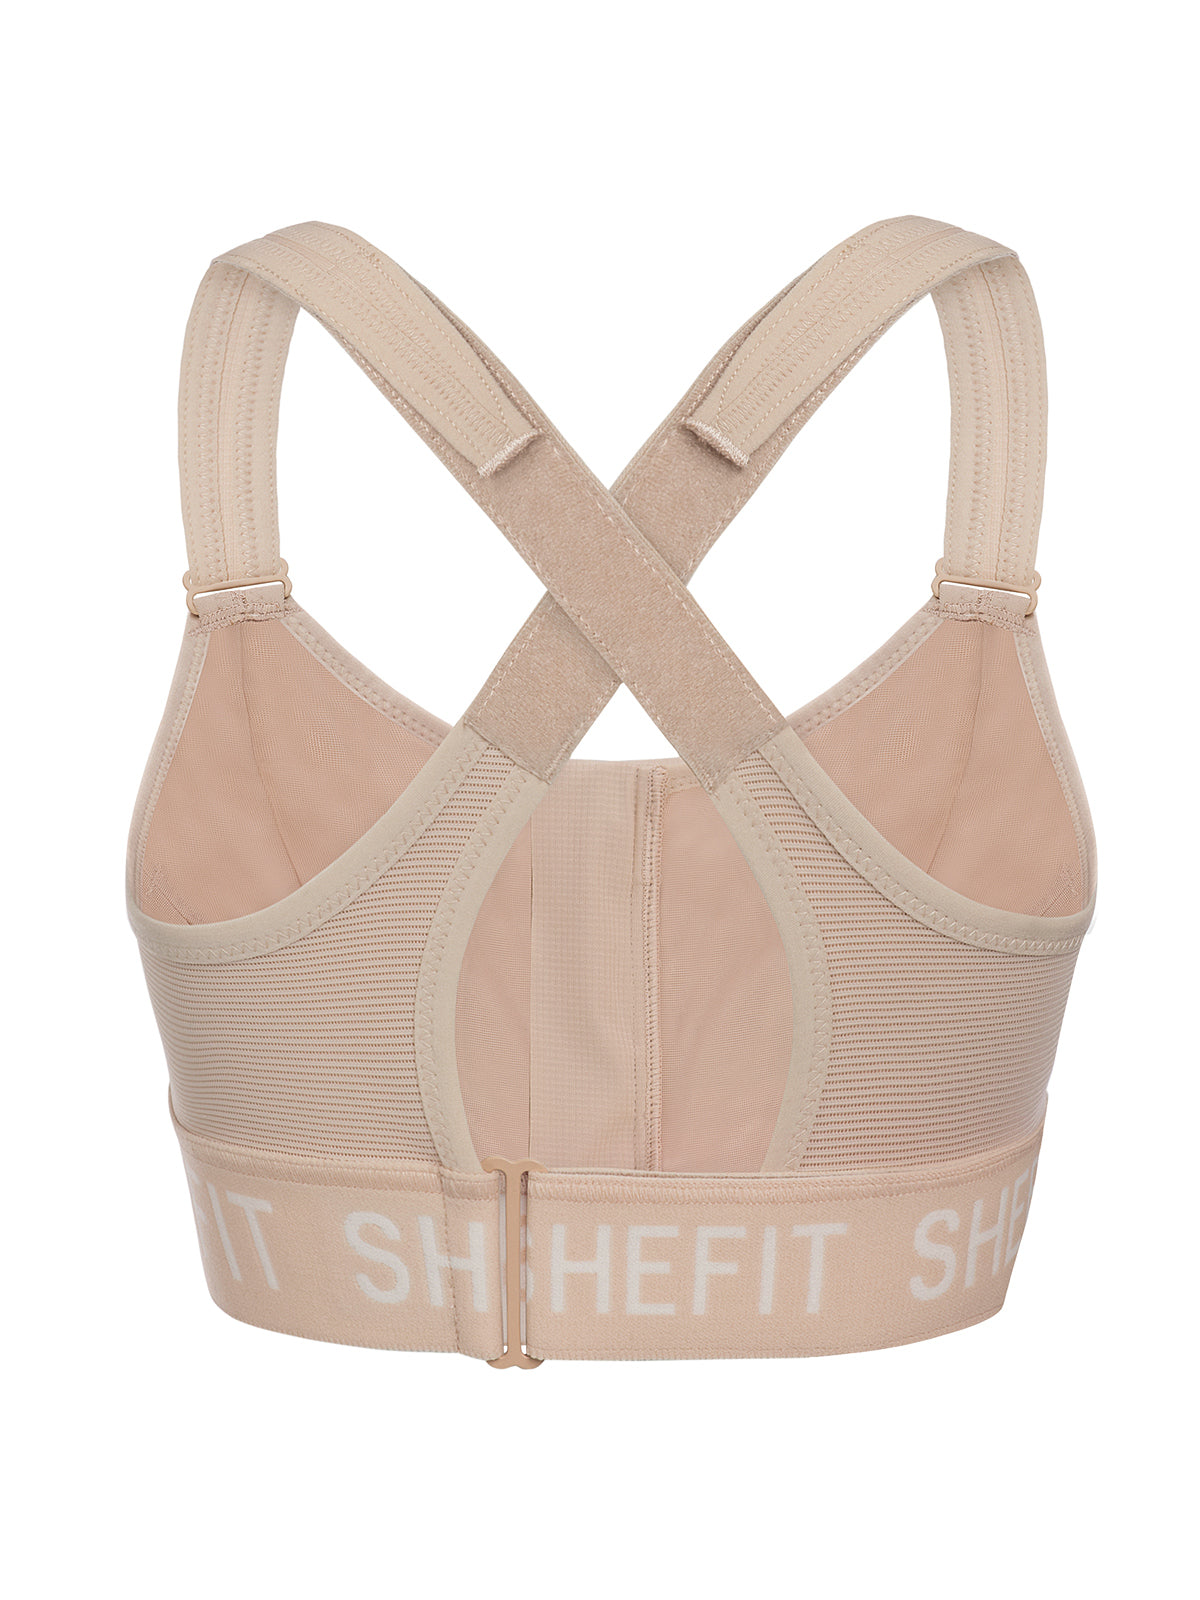 New SheFit White Sm High Impact ULTIMATE SPORTS BRA Adjustable Straps Front  Zip